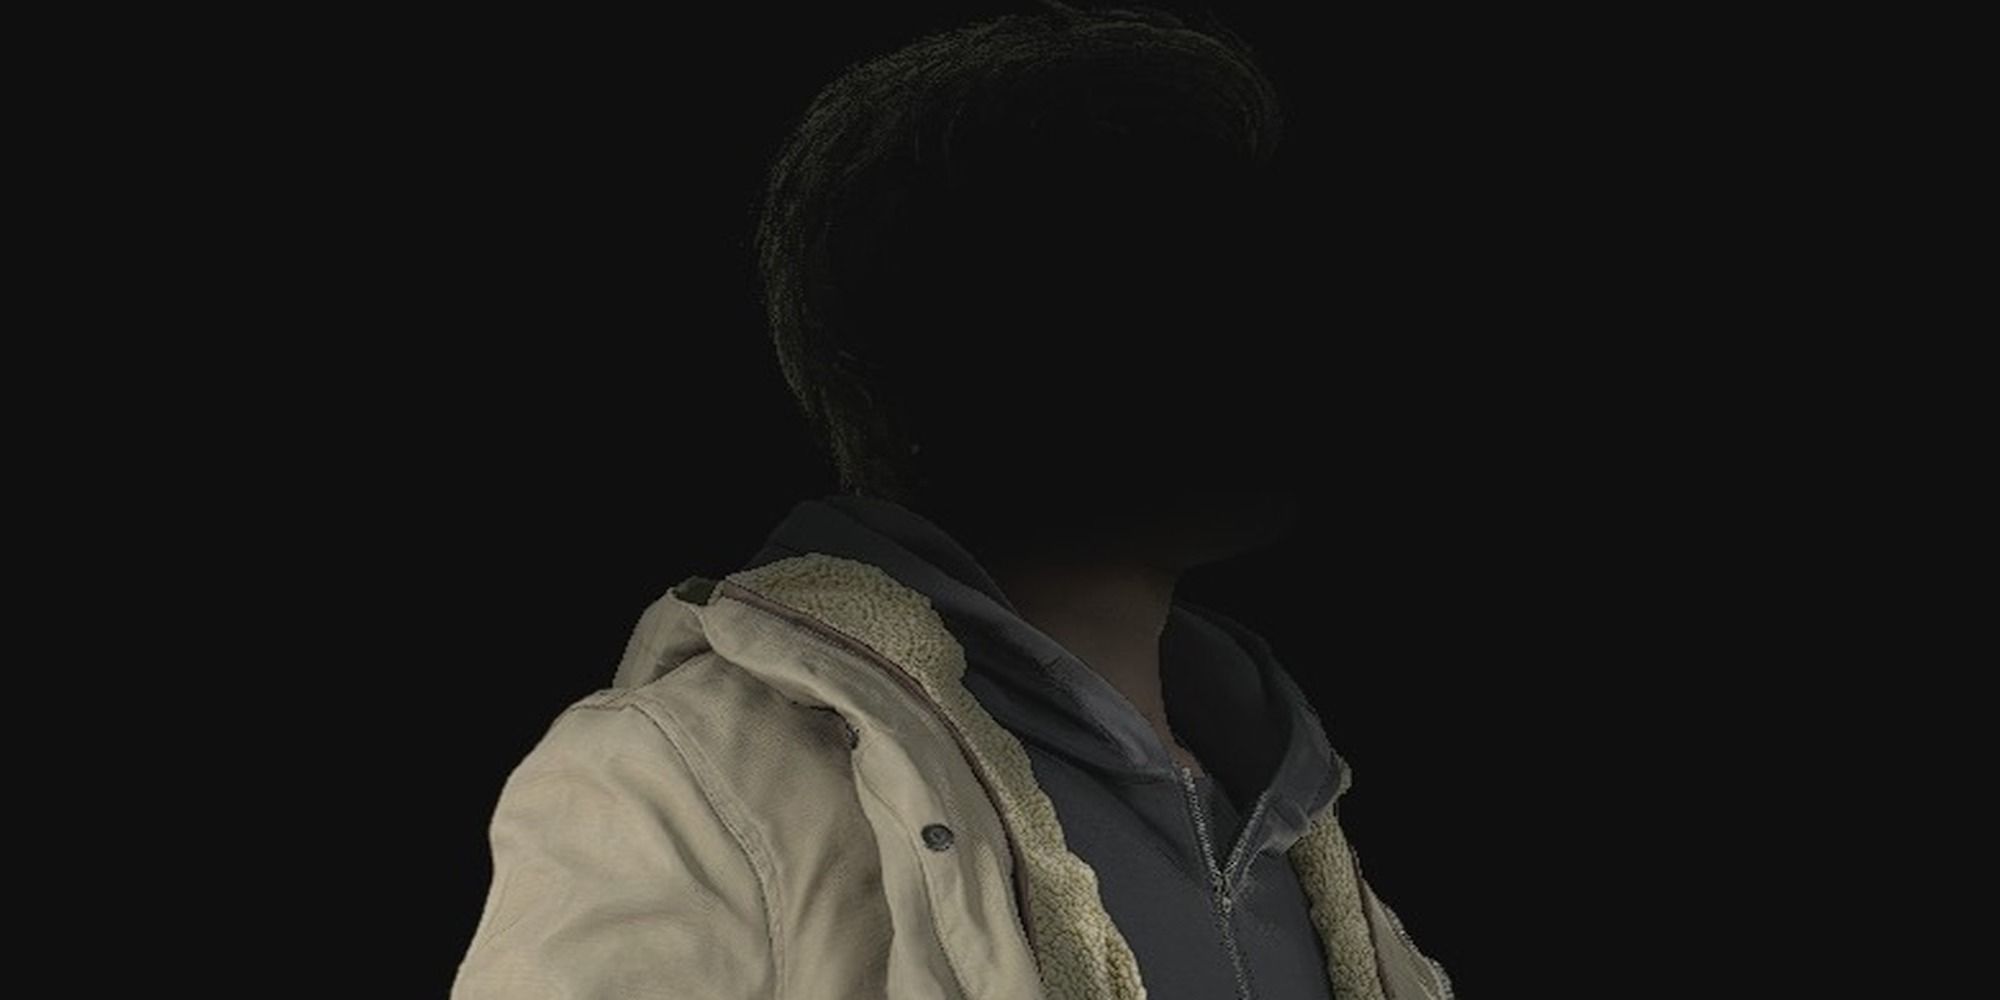 Ethan Winters with a dark face (Resident Evil series)